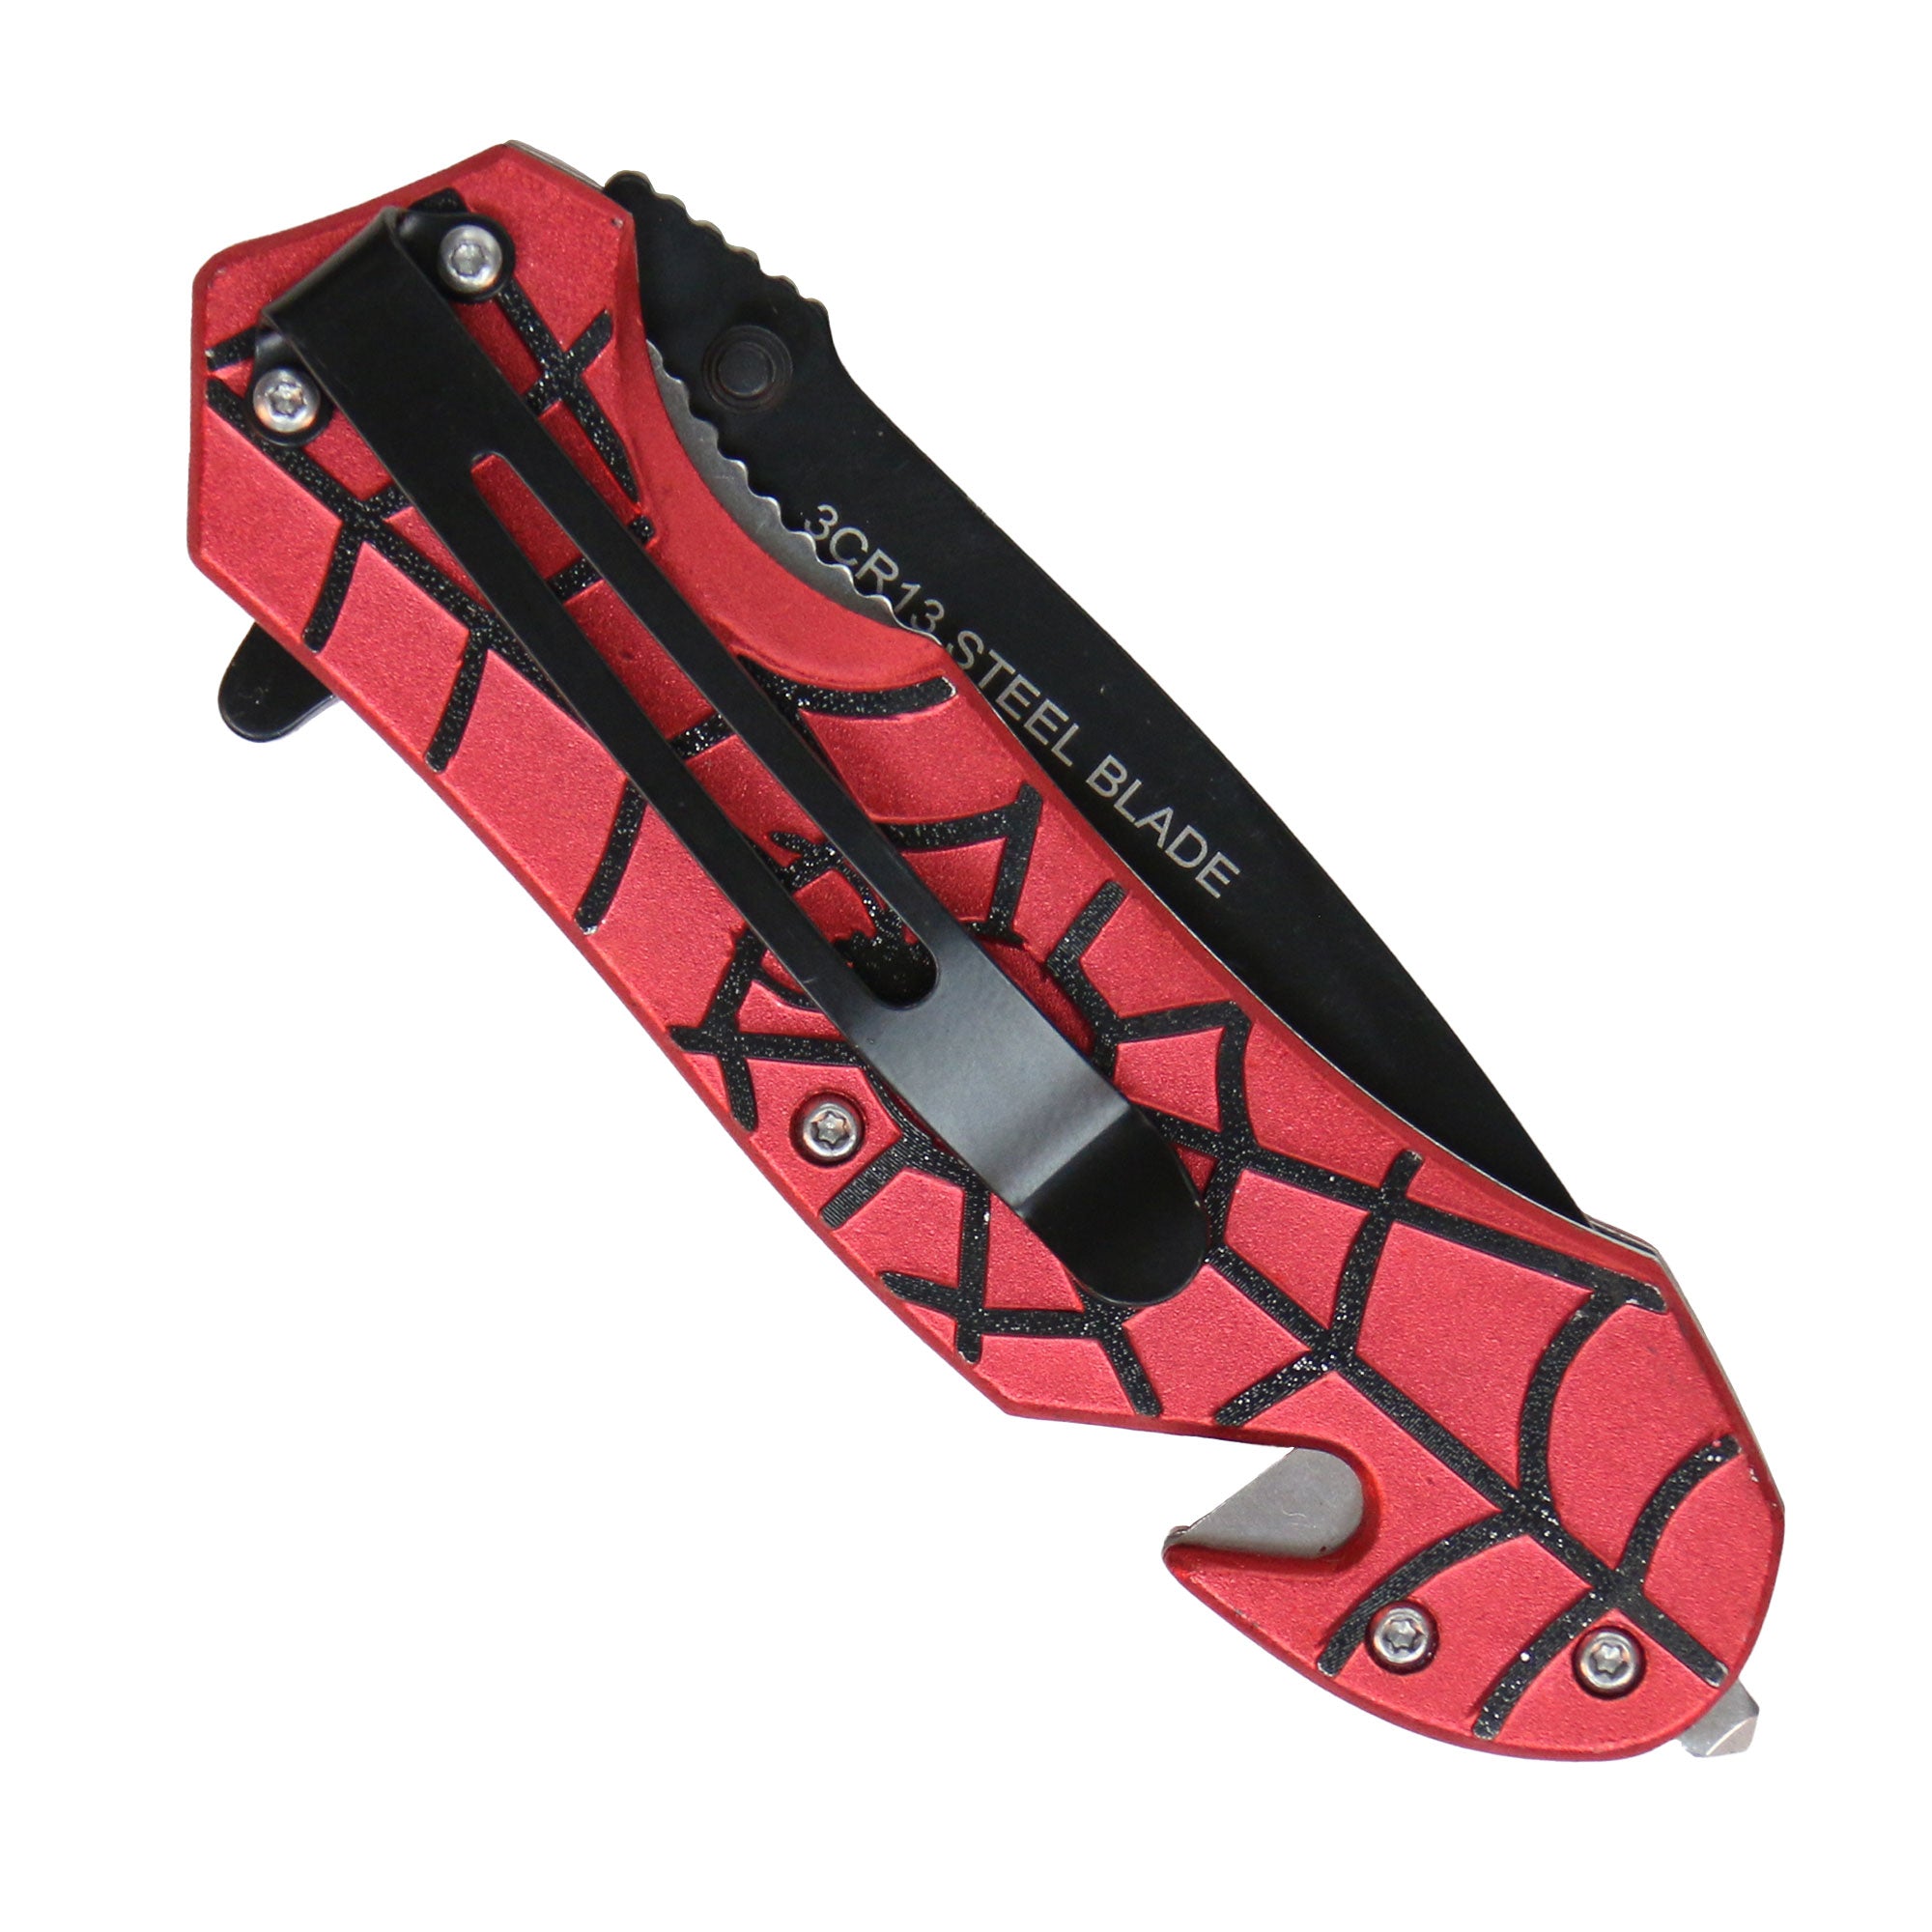 Hot Leathers Red Spider Knife KNA1152